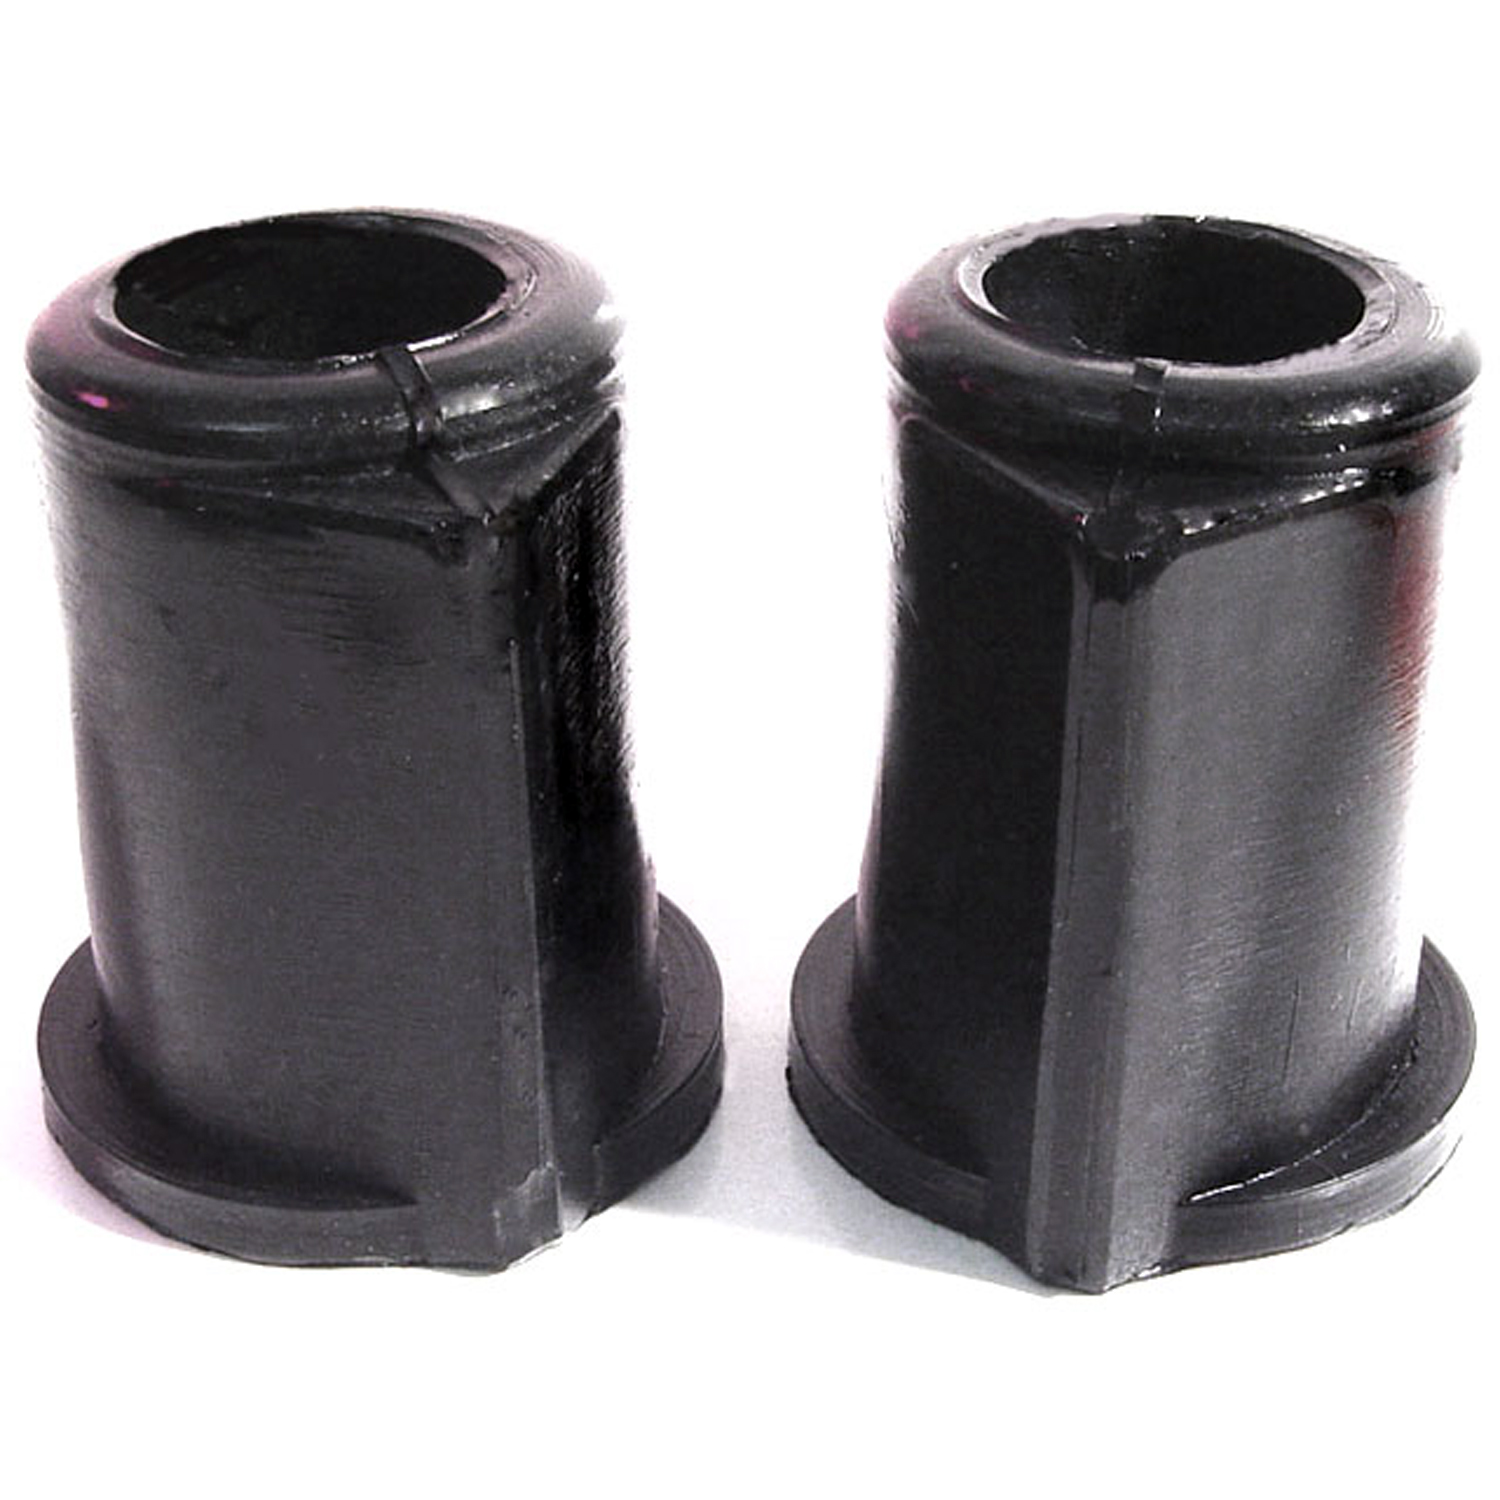 1948 Lincoln 876H Series Sway Bar Bushings.  Made with cloth reinforcement-BN 32-C